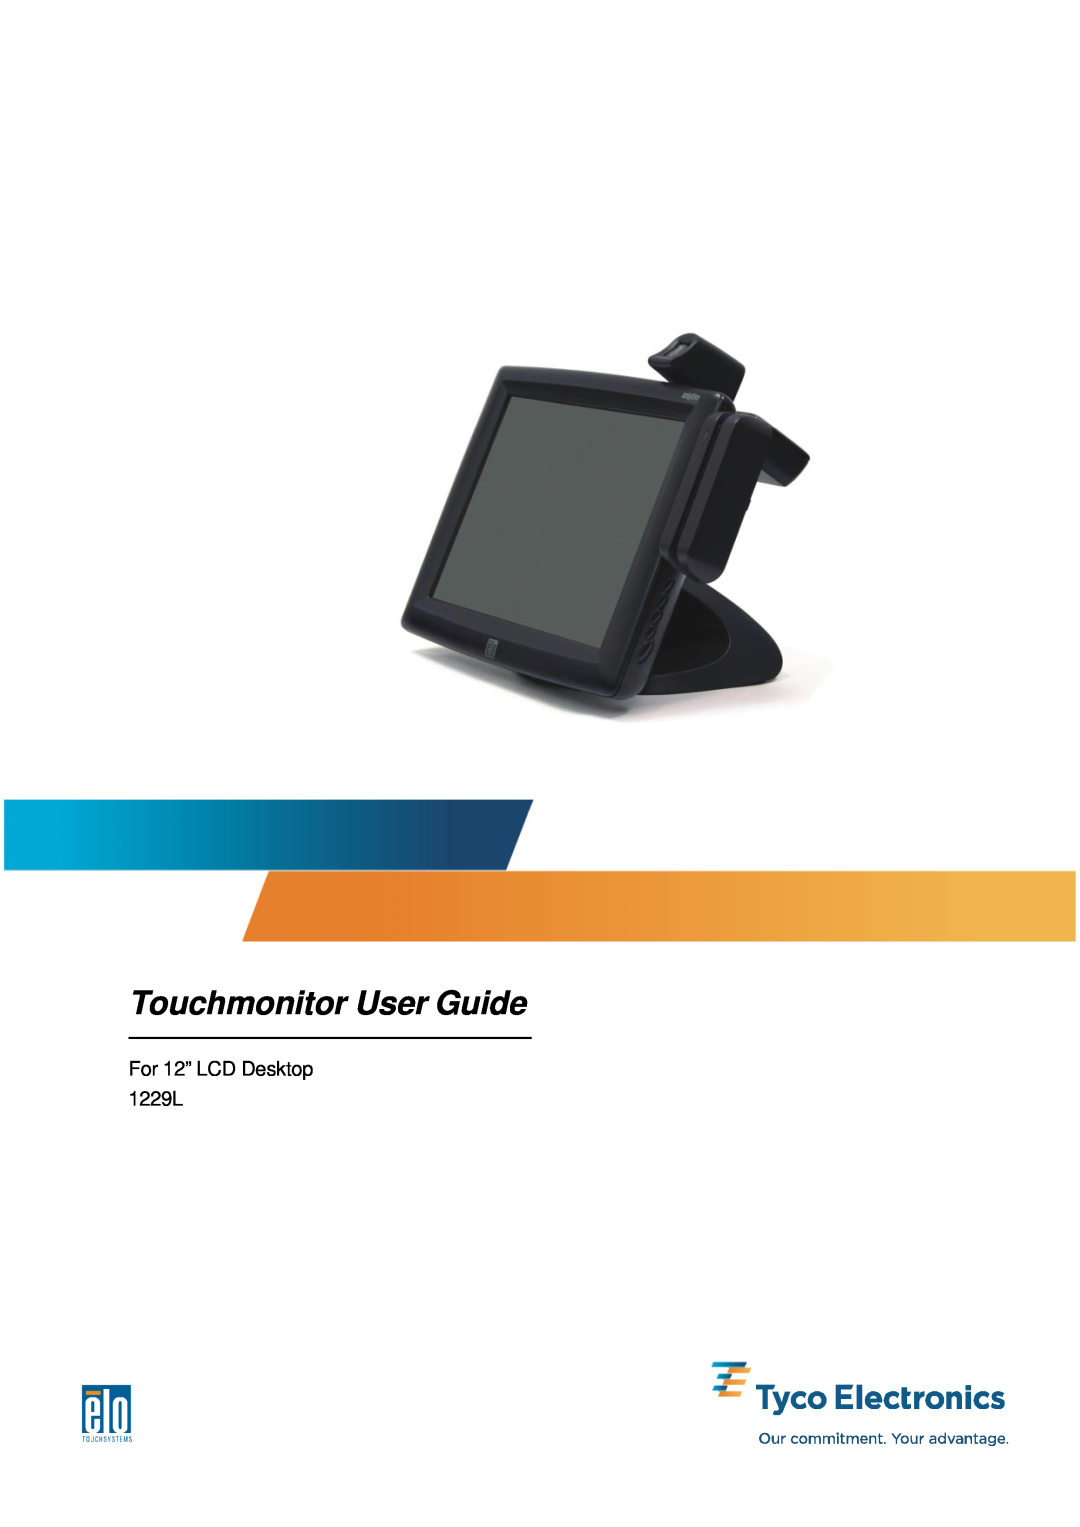 Tyco Electronics manual Touchmonitor User Guide, For 12” LCD Desktop 1229L 